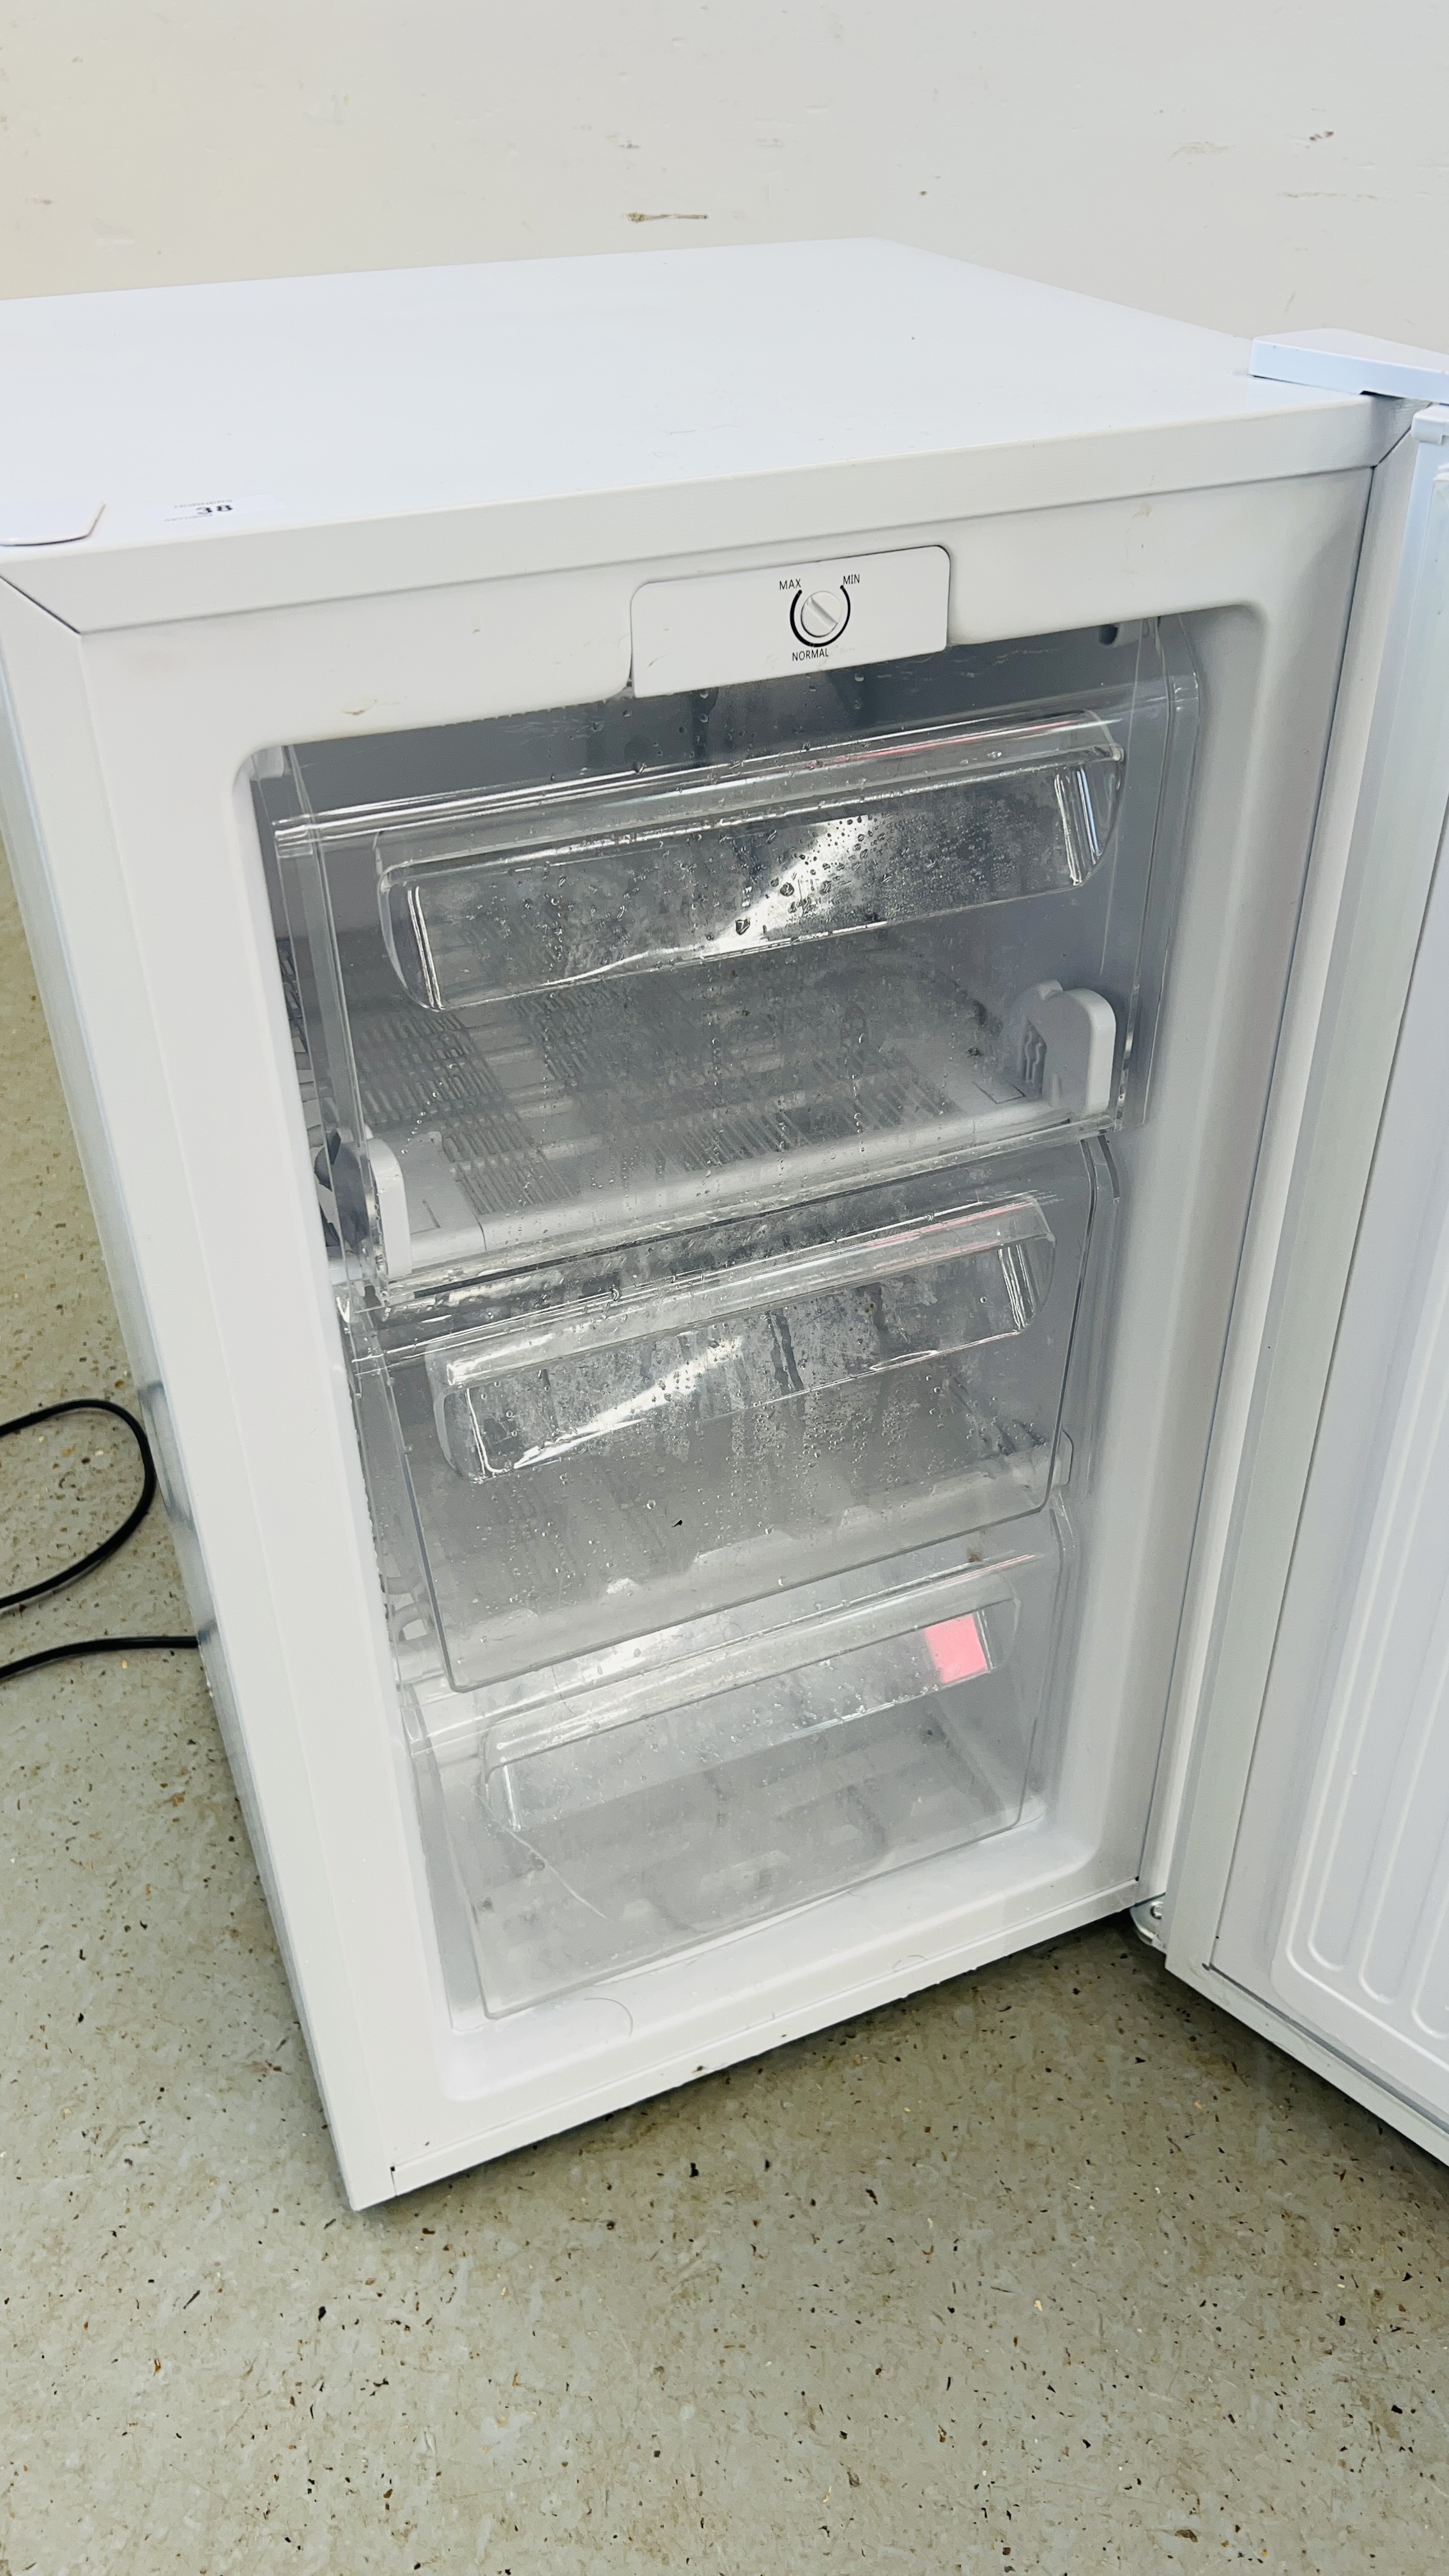 AN UNBRANDED UNDERCOUNTER THREE DRAWER FREEZER - SOLD AS SEEN. - Image 4 of 6